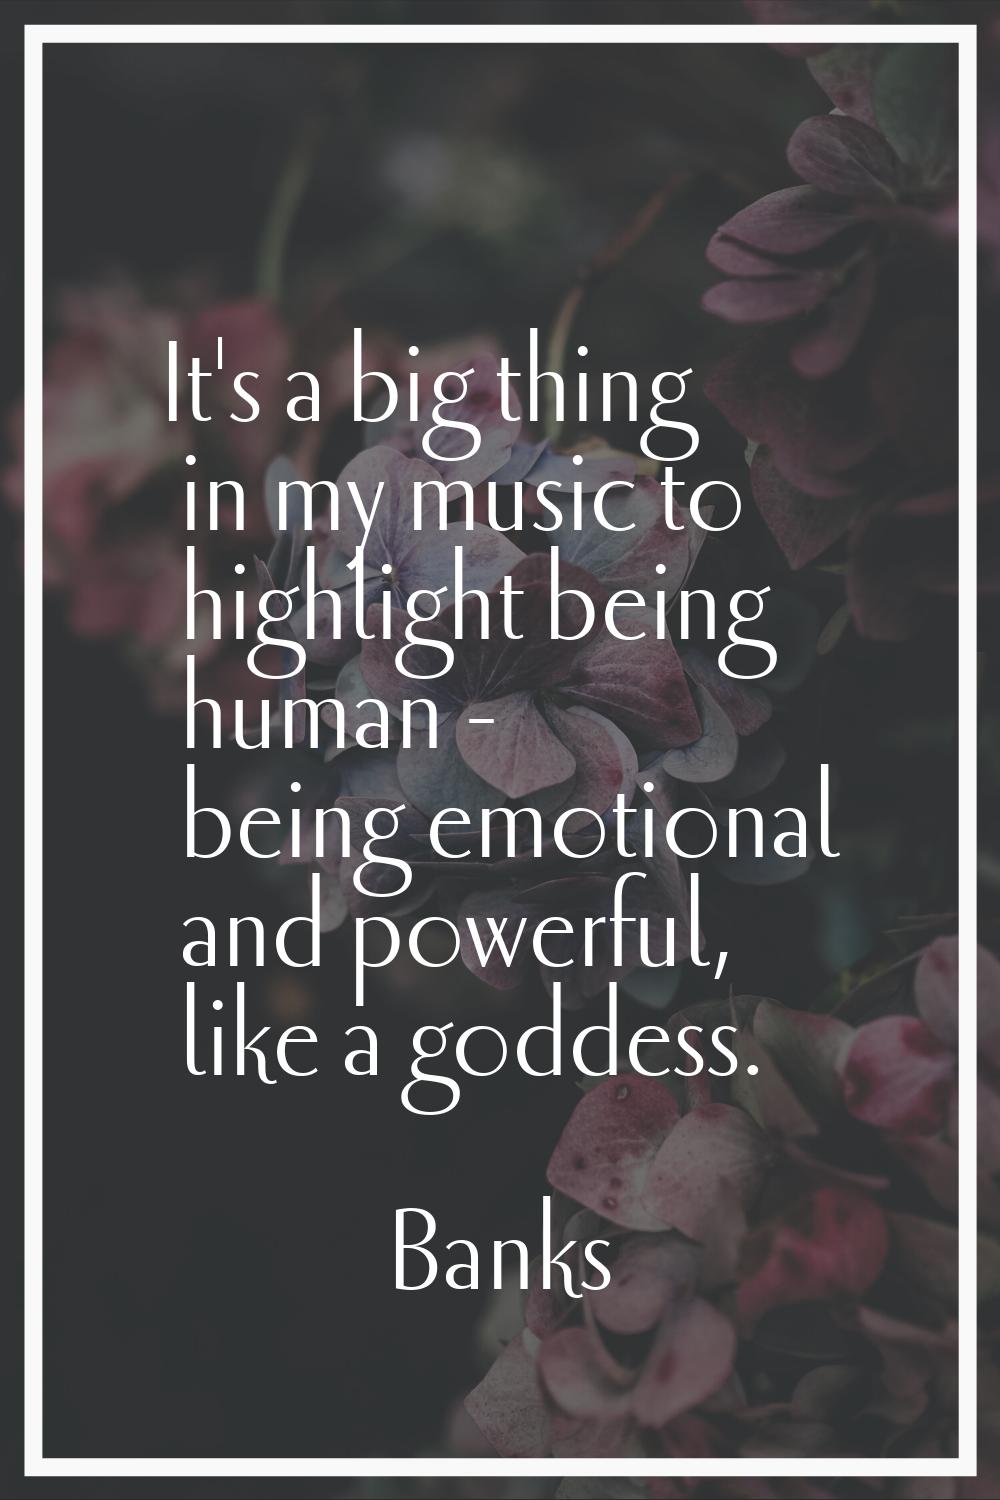 It's a big thing in my music to highlight being human - being emotional and powerful, like a goddes